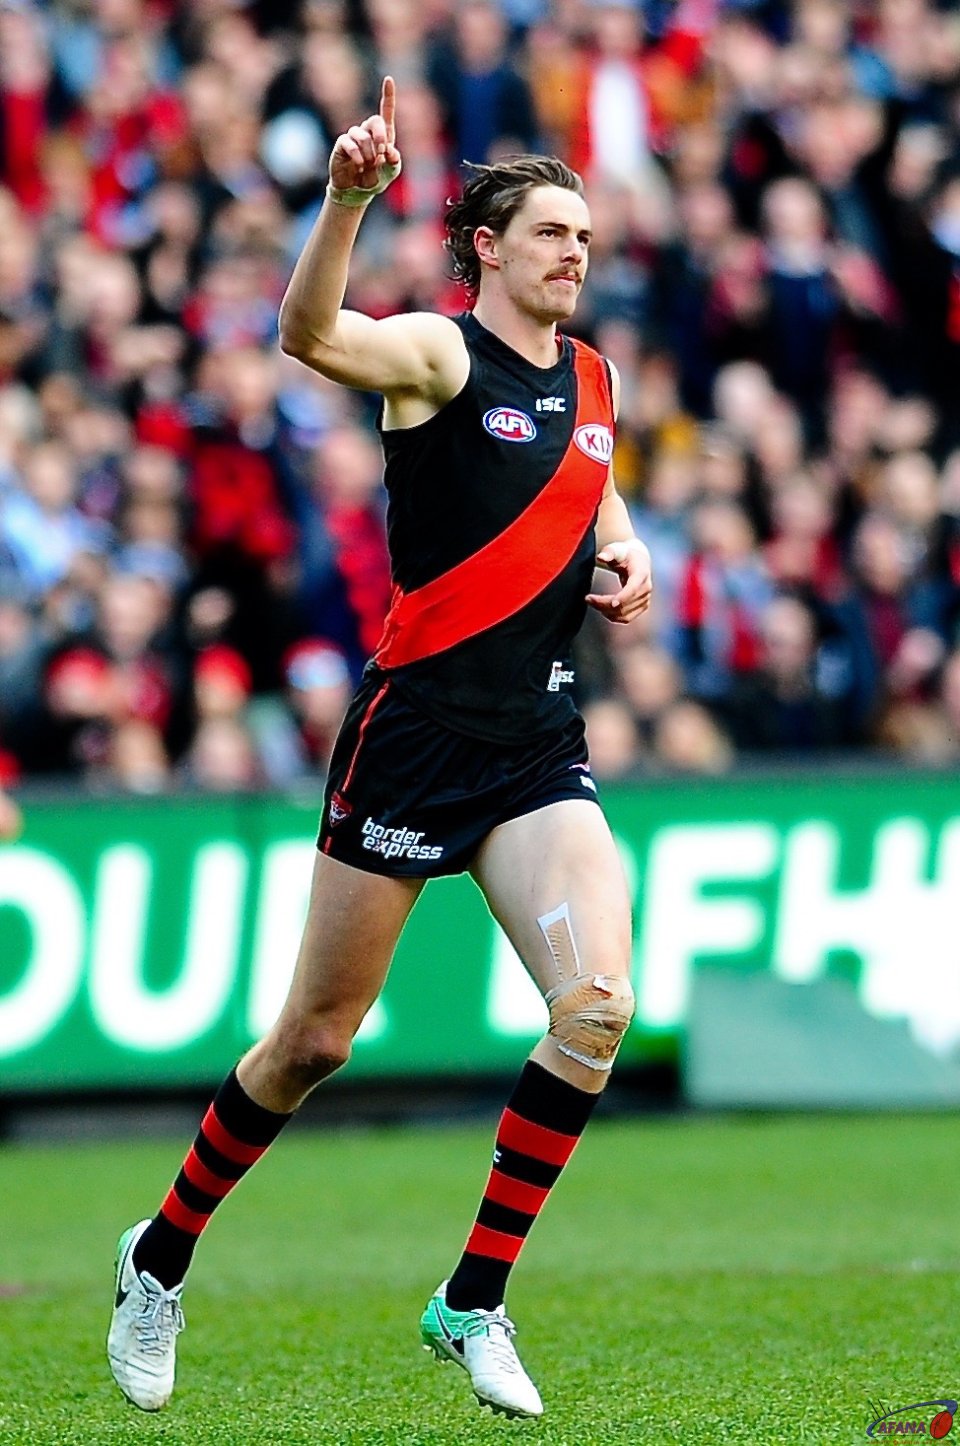 Daniher leads the Coleman with this goal